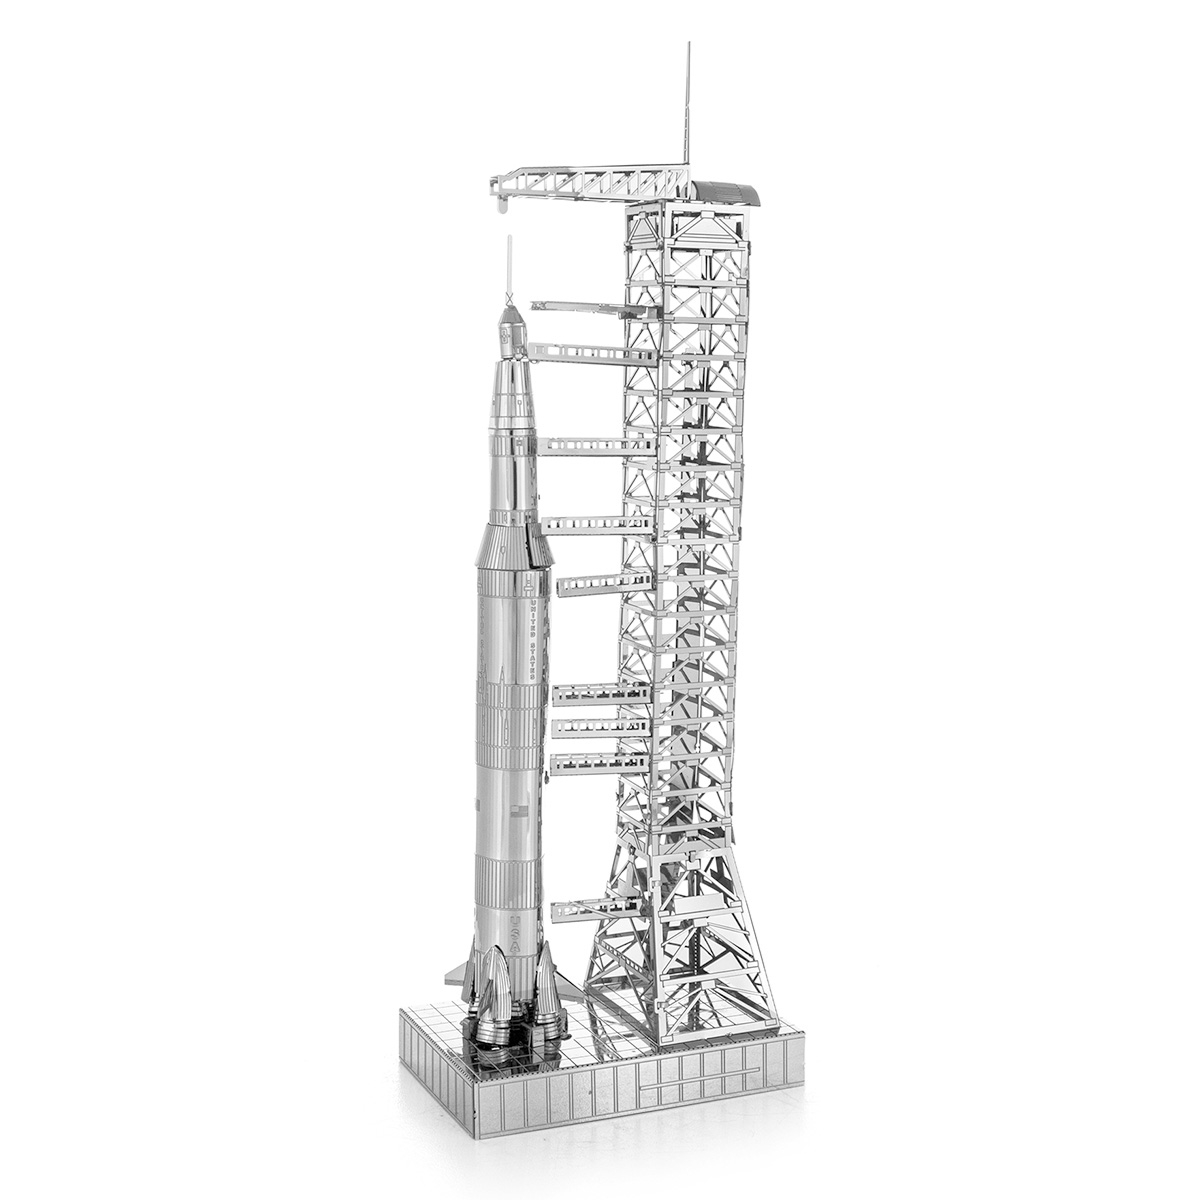 Metal Earth Apollo Saturn V with Gantry 3D Metal Model Kit MMS167 for sale online 